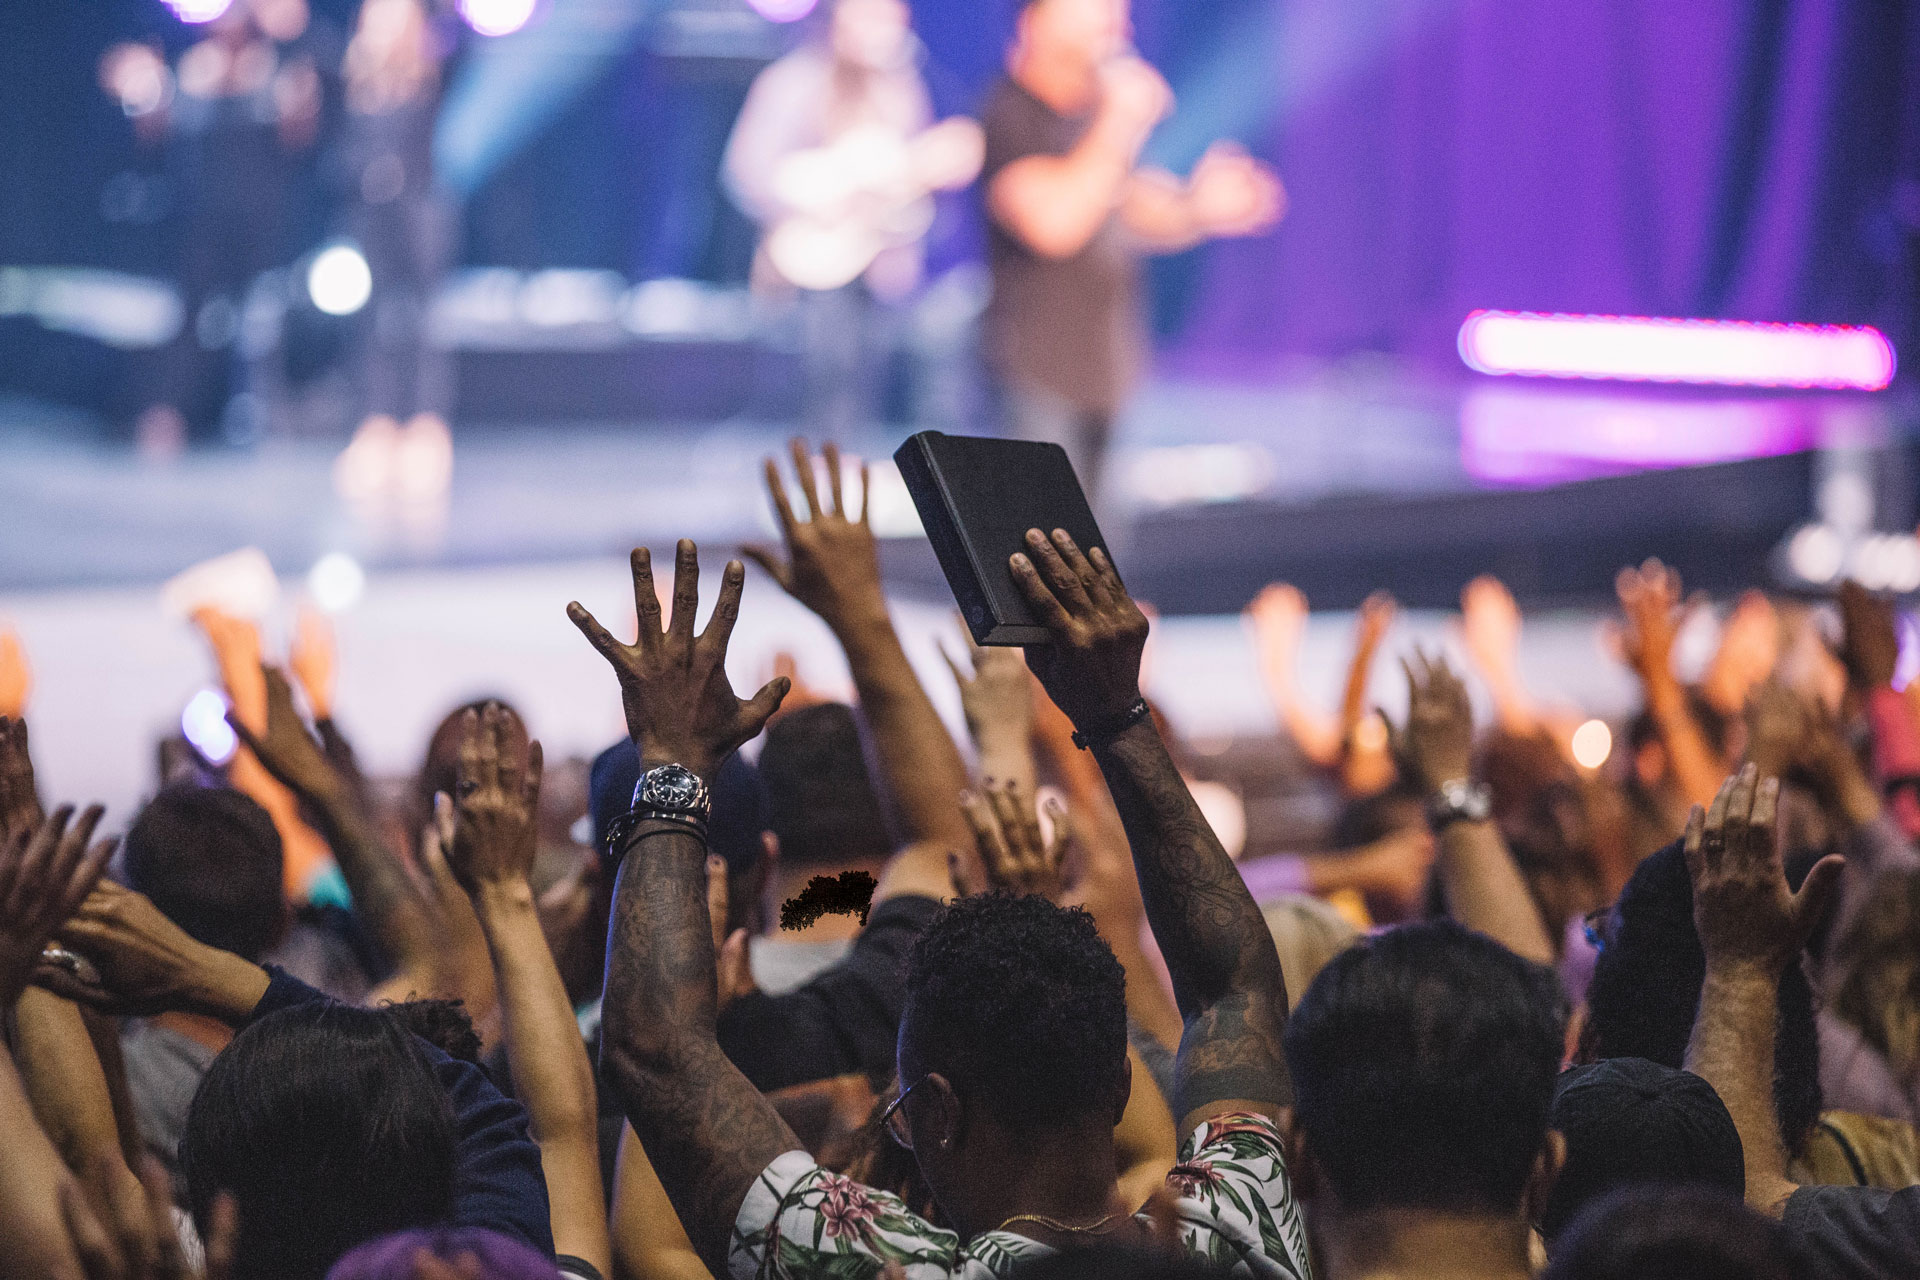 If you're in search of fresh ideas for church growth, then it's time to start church sharing--the church growth strategy that works.